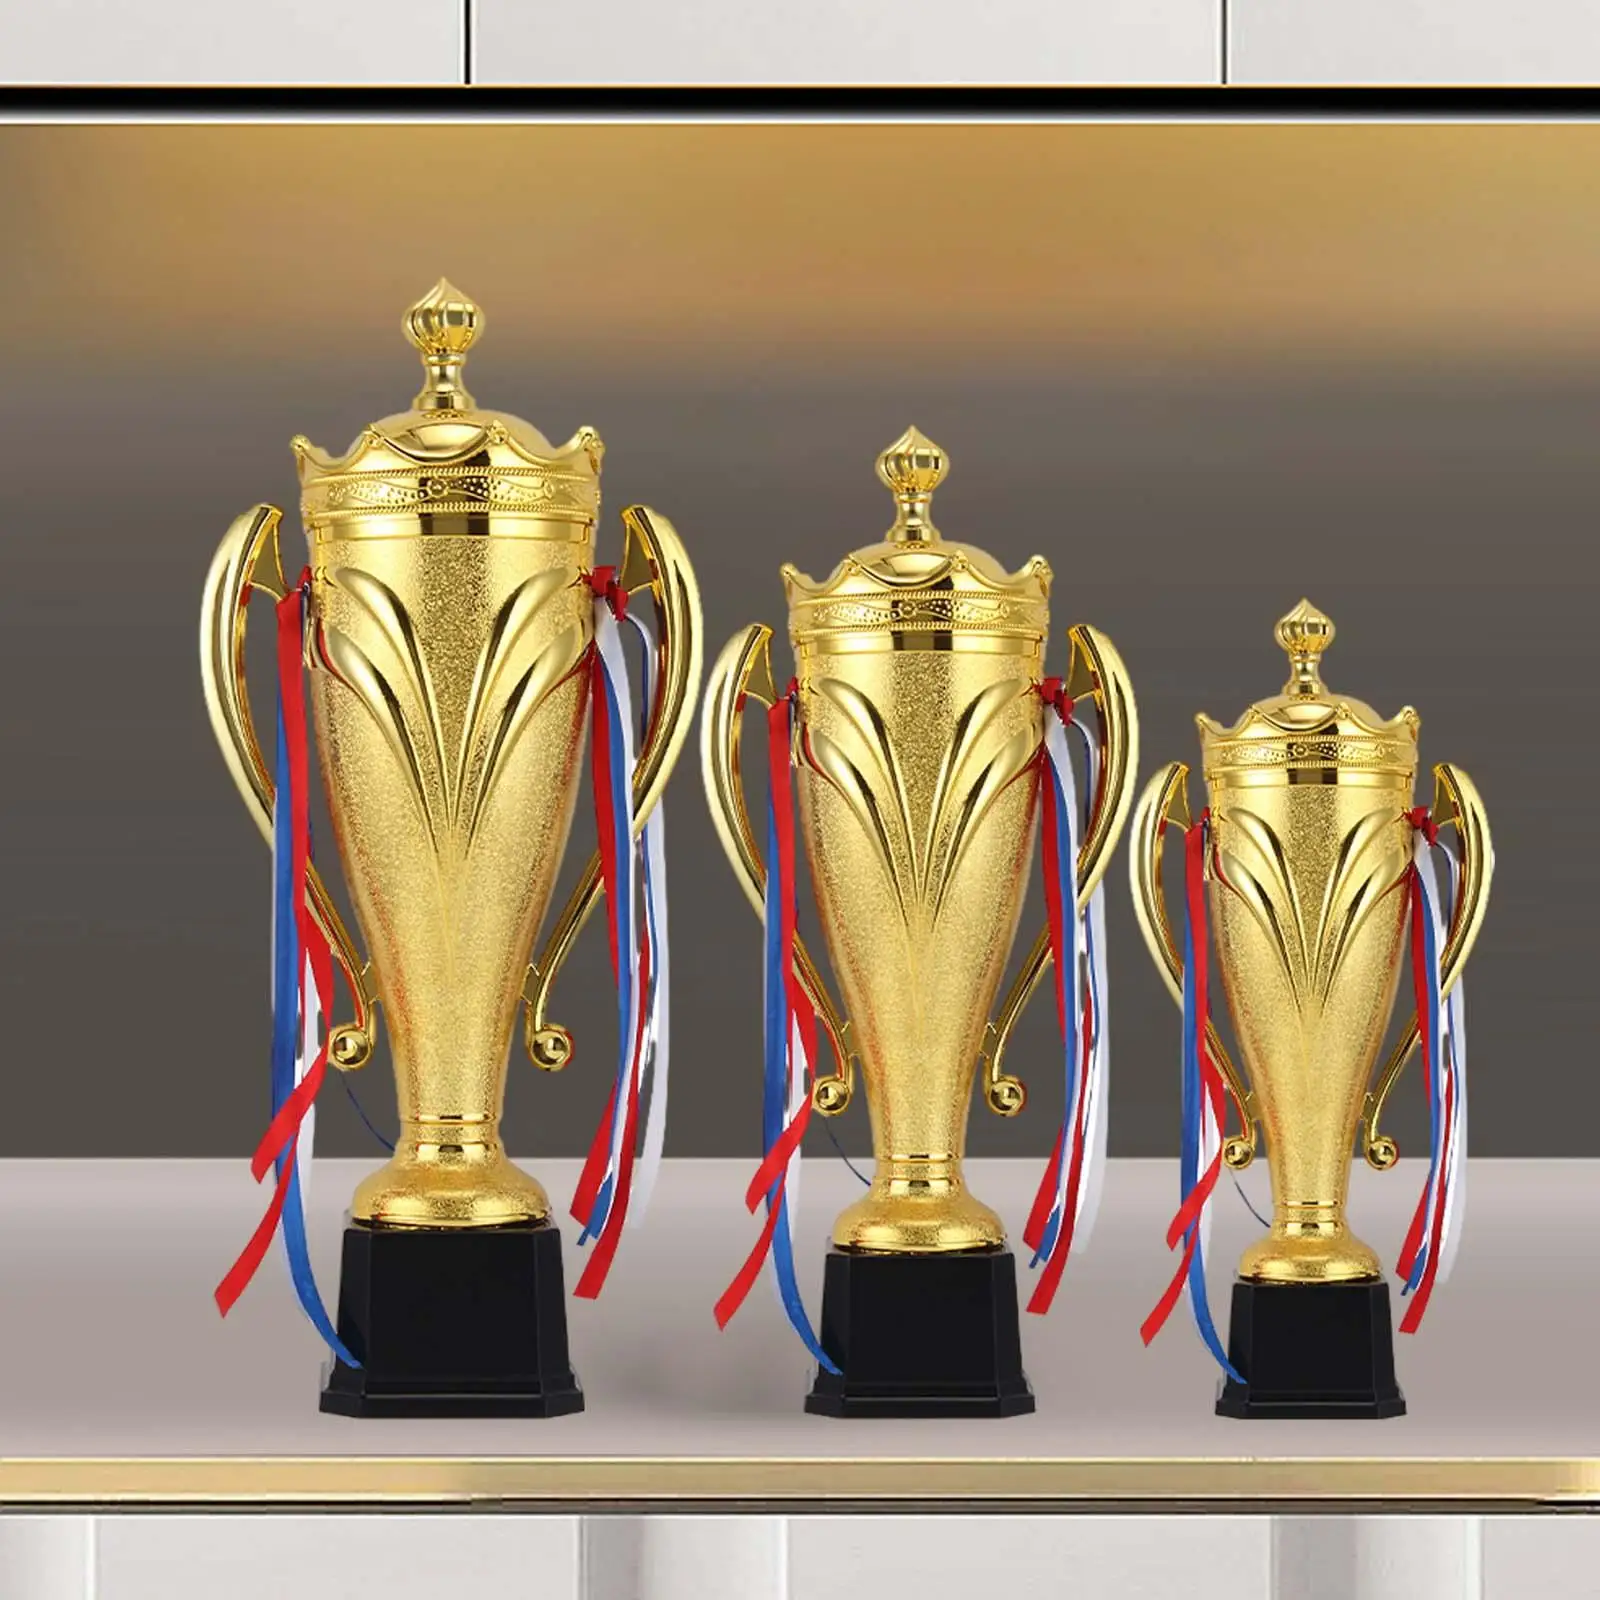 PP Material Winner Award Trophies Cup Gold Color Exquisite Workmanship Multipurpose Party Favors Props for Displaying Birthdays